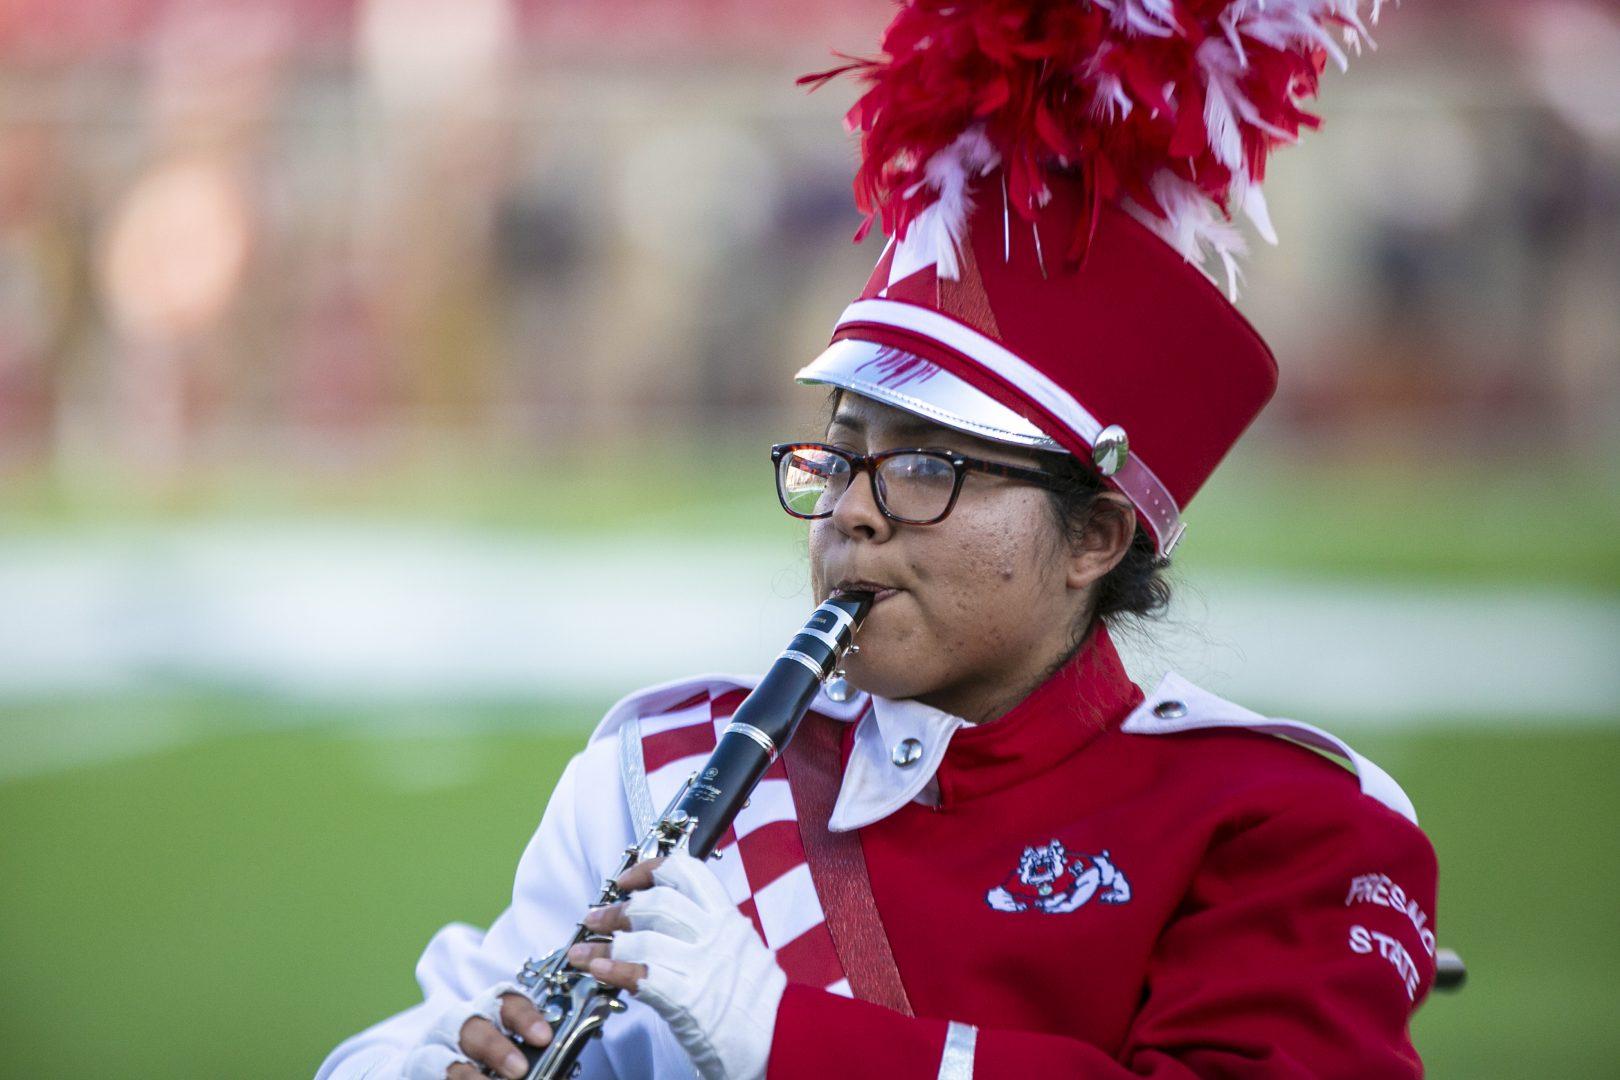 Viviana+Reyes+performs+at+the+beginning+of+a+Fresno+State+football+game+on+Saturday%2C+Nov.+9%2C+2019.+%28Larry+Valenzuela%2FThe+Collegian%29